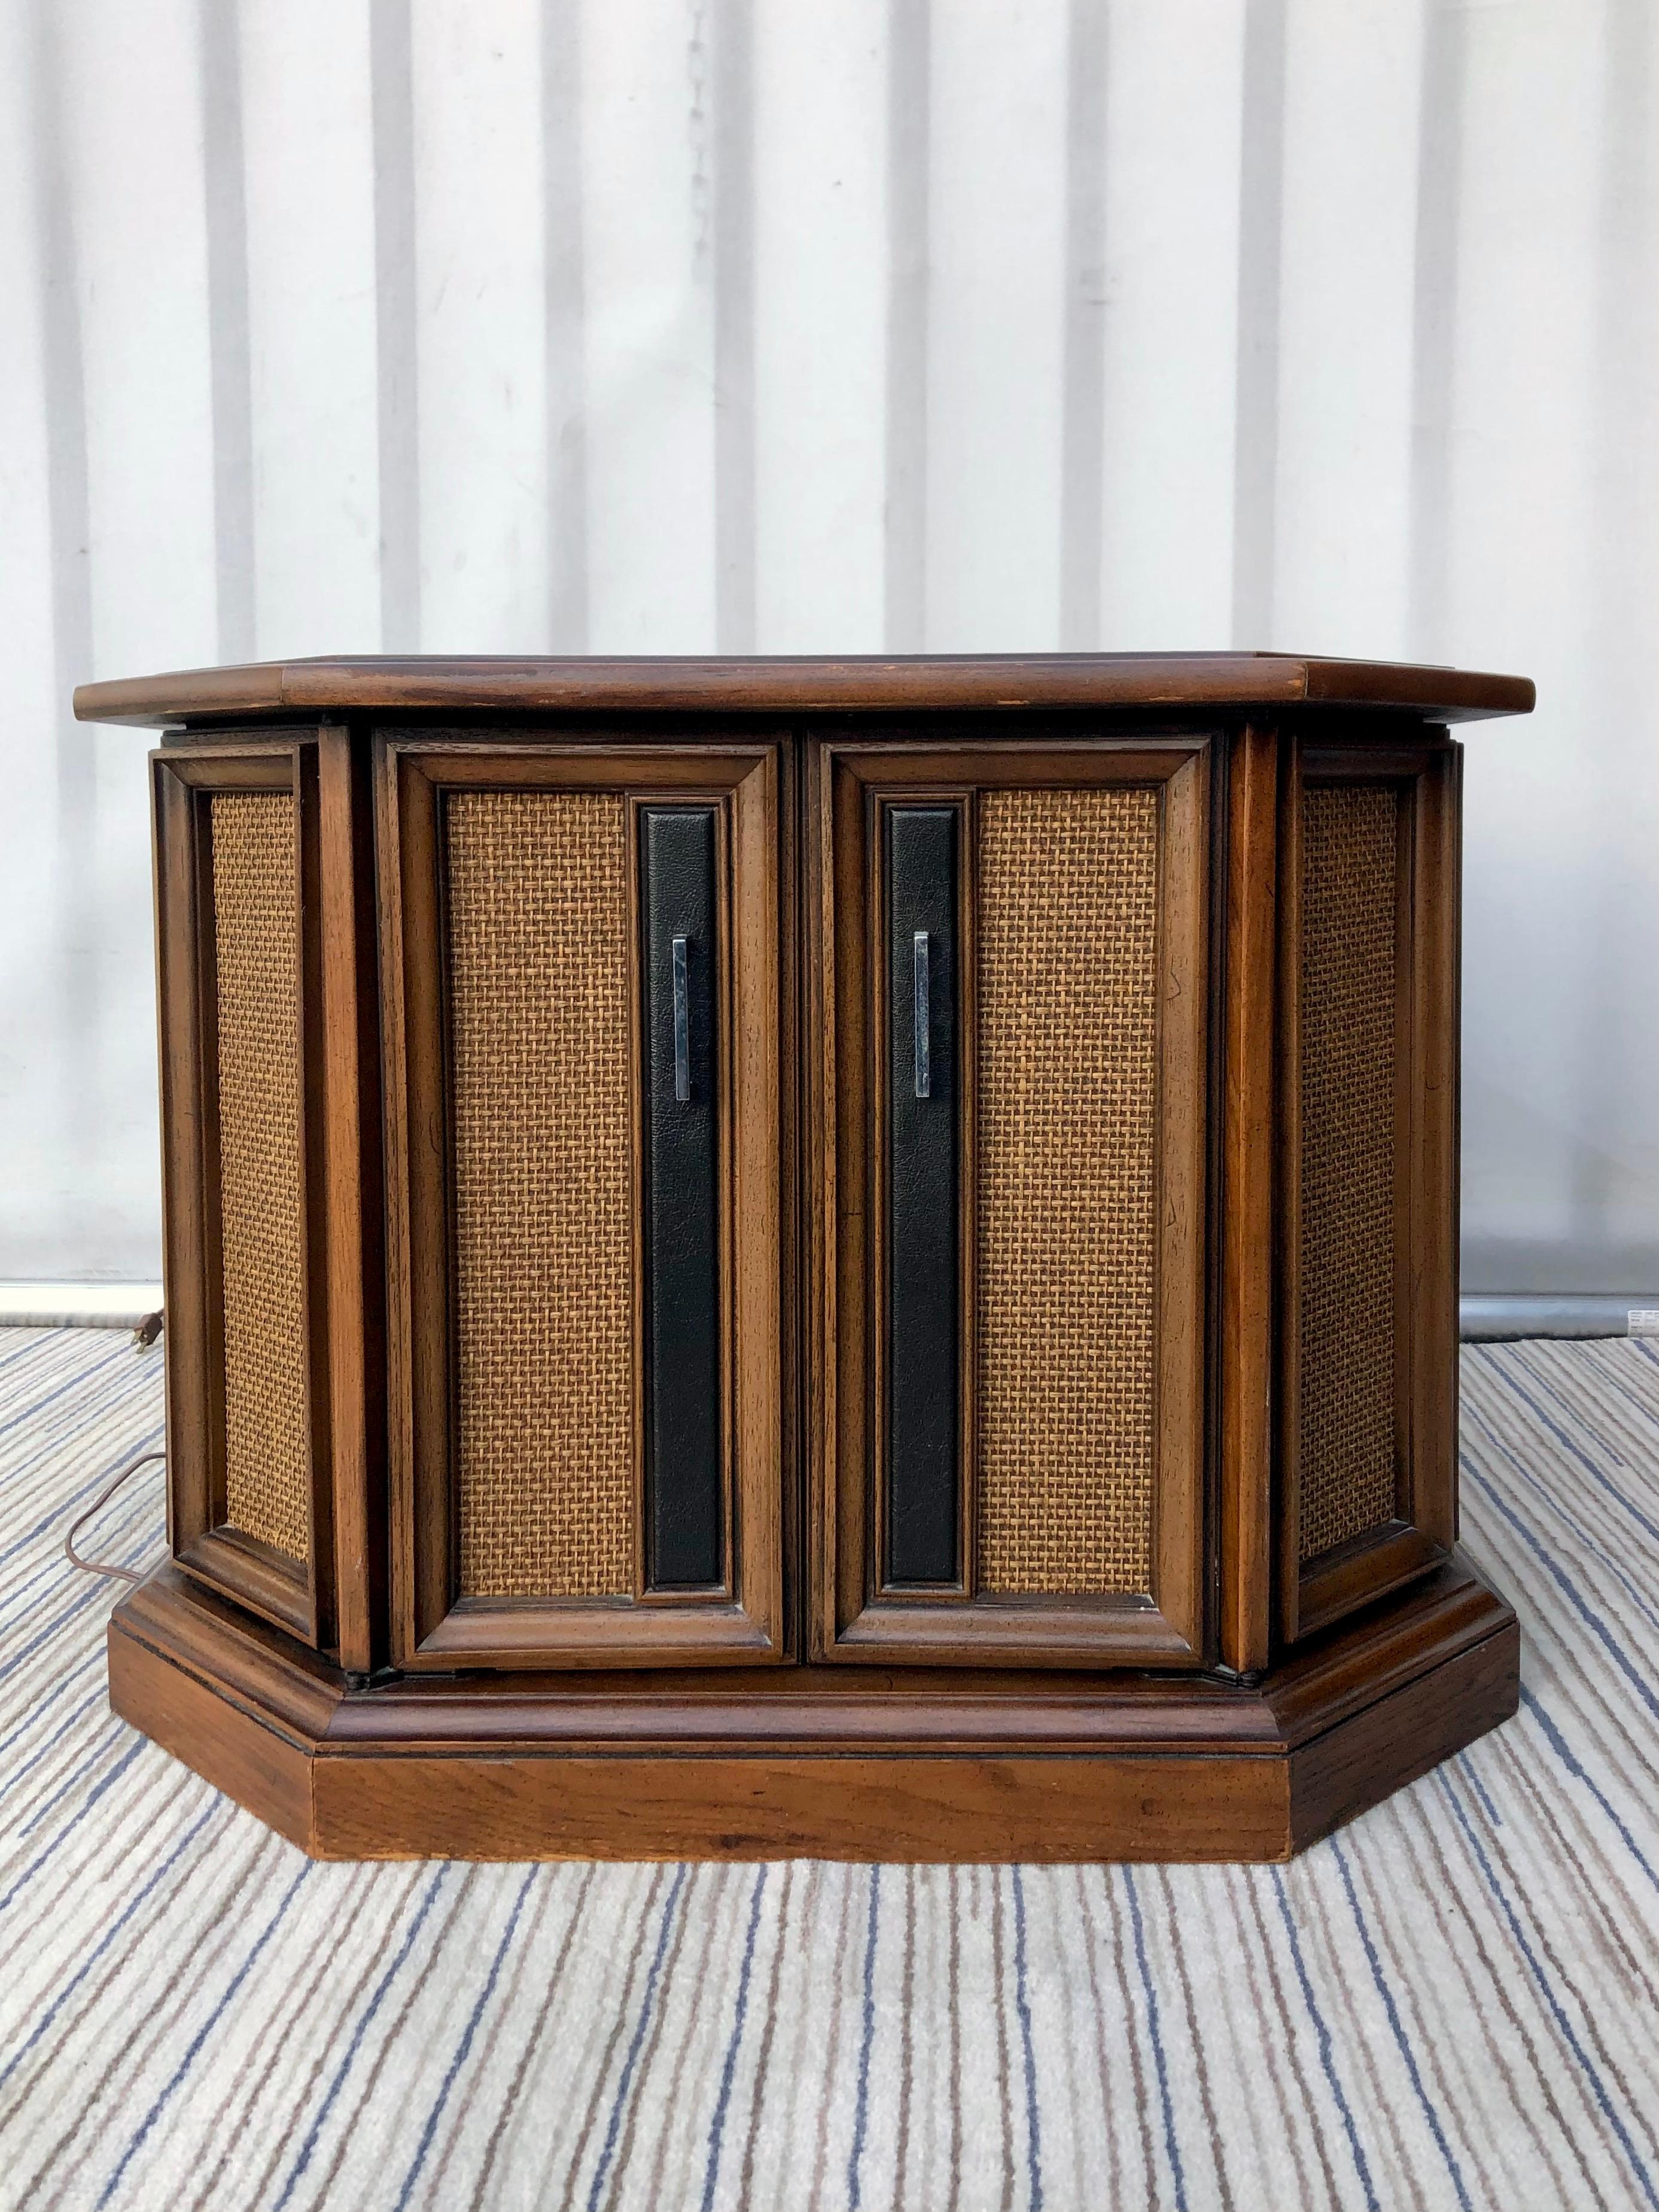 Vintage Mid-Century Modern Magnavox Entertainment Center /Accent Table, circa 1960s.
Features a midcentury Hollywood Regency Walnut Cabinet / Accent Table with doors and a pullout radio/ record player console.
The table has a textured slate top to